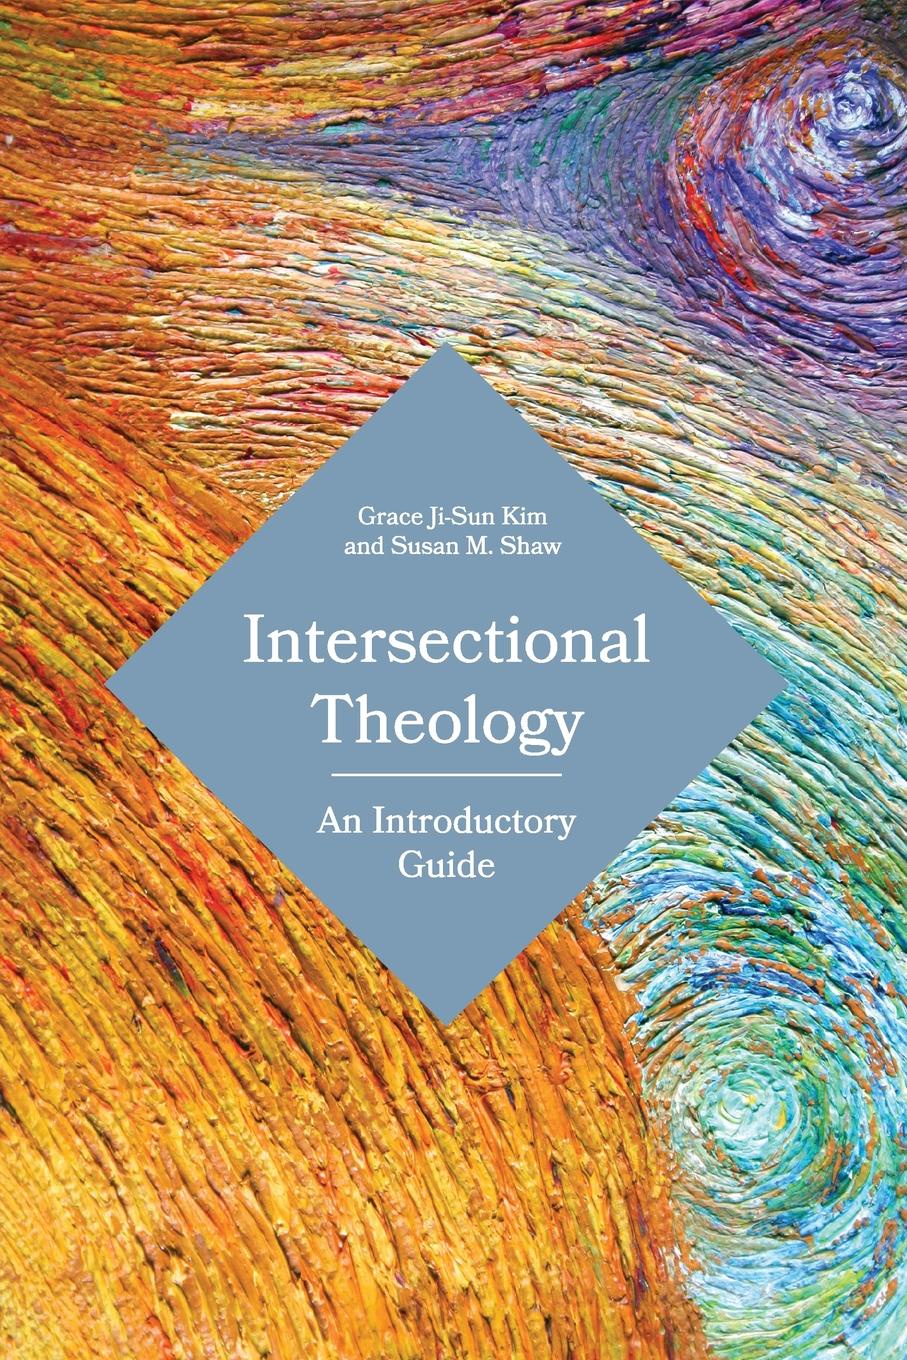 Intersectional Theology. An Introductory Guide